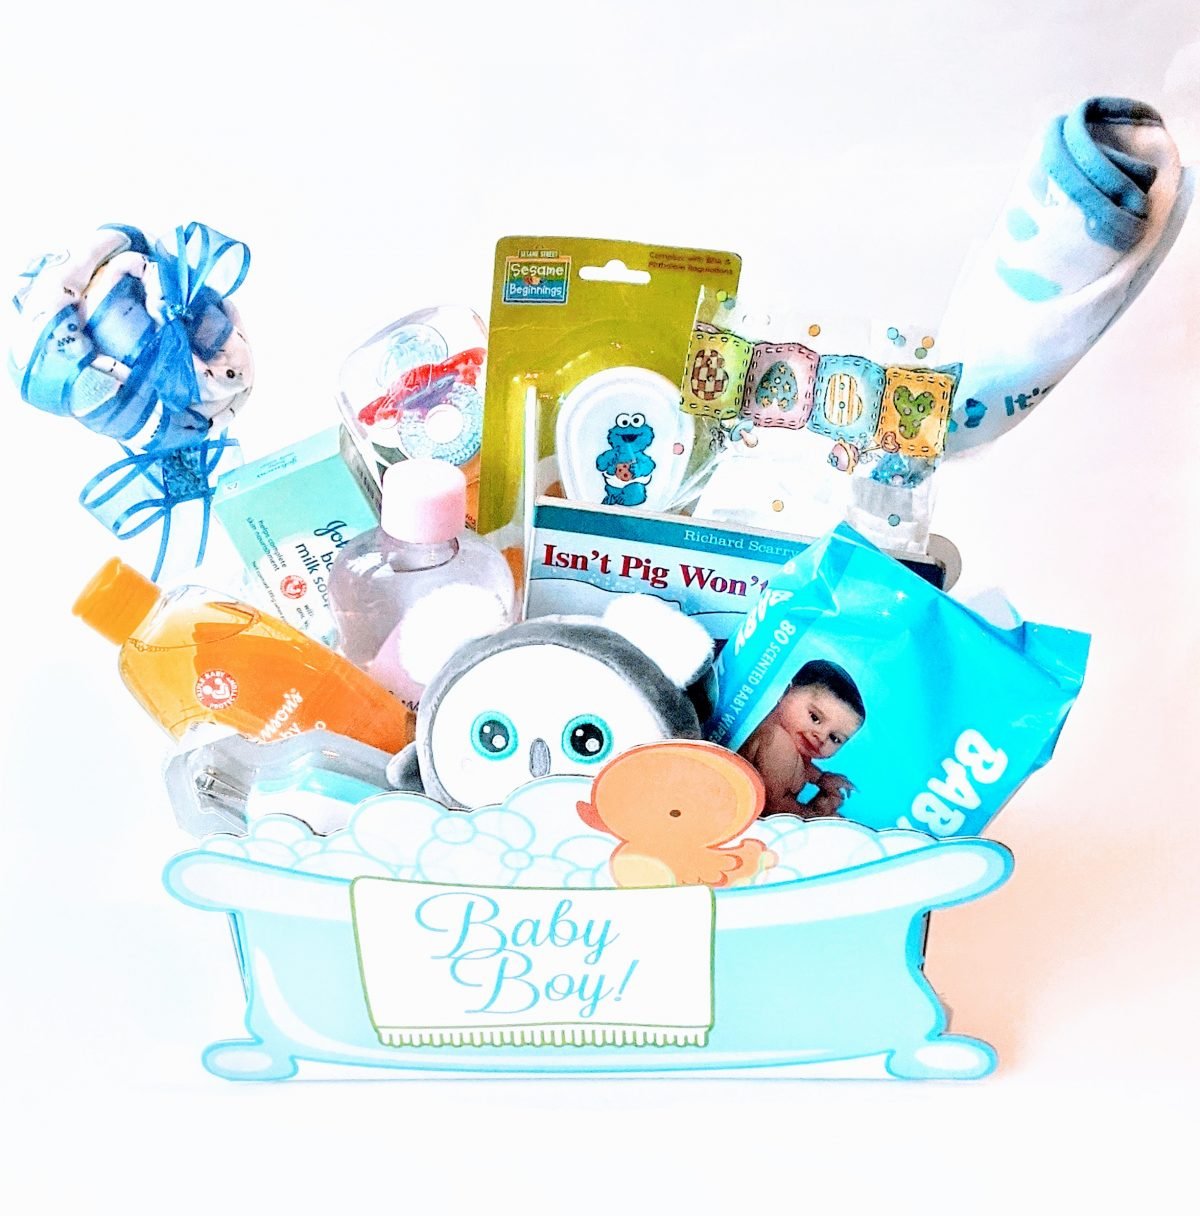 Baby Boy Gift Set for all baby occasions including baby arrival and baby showers.